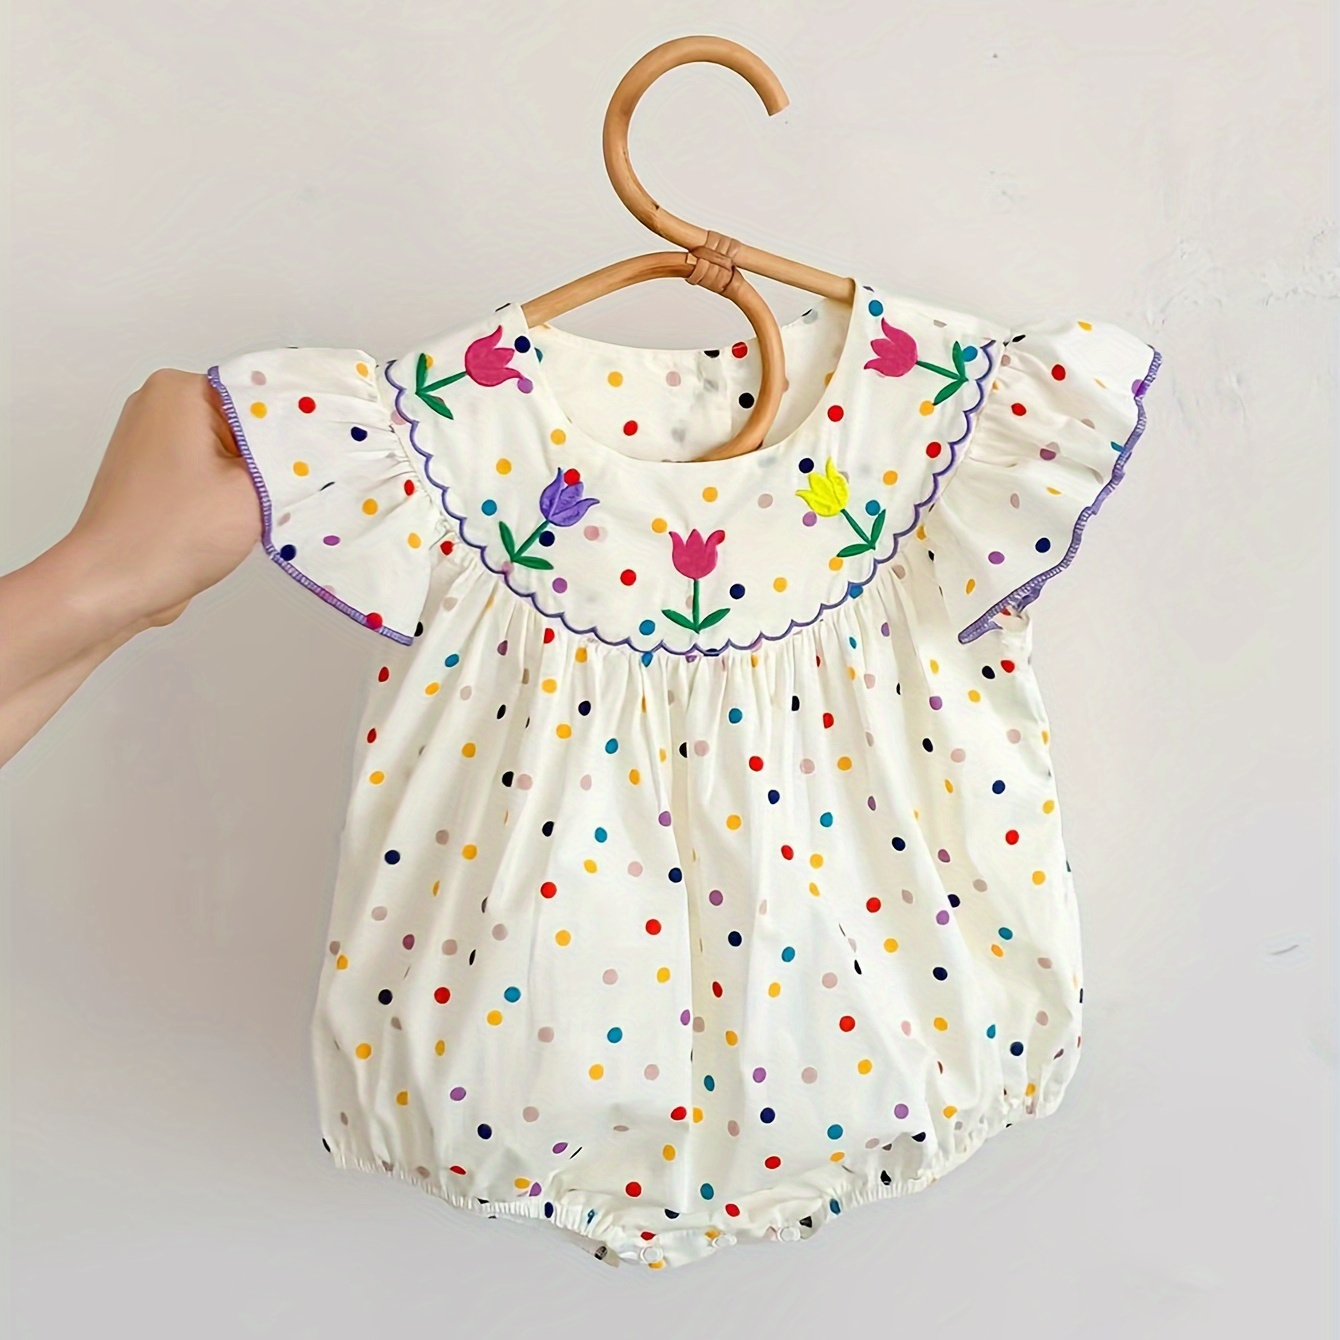 

Baby's Tulip Embroidered Comfy Cotton Triangle Bodysuit, Casual Colorful Polka Dots Pattern Cap Sleeve Romper, Toddler & Infant Girl's Onesie For Summer, As Gift